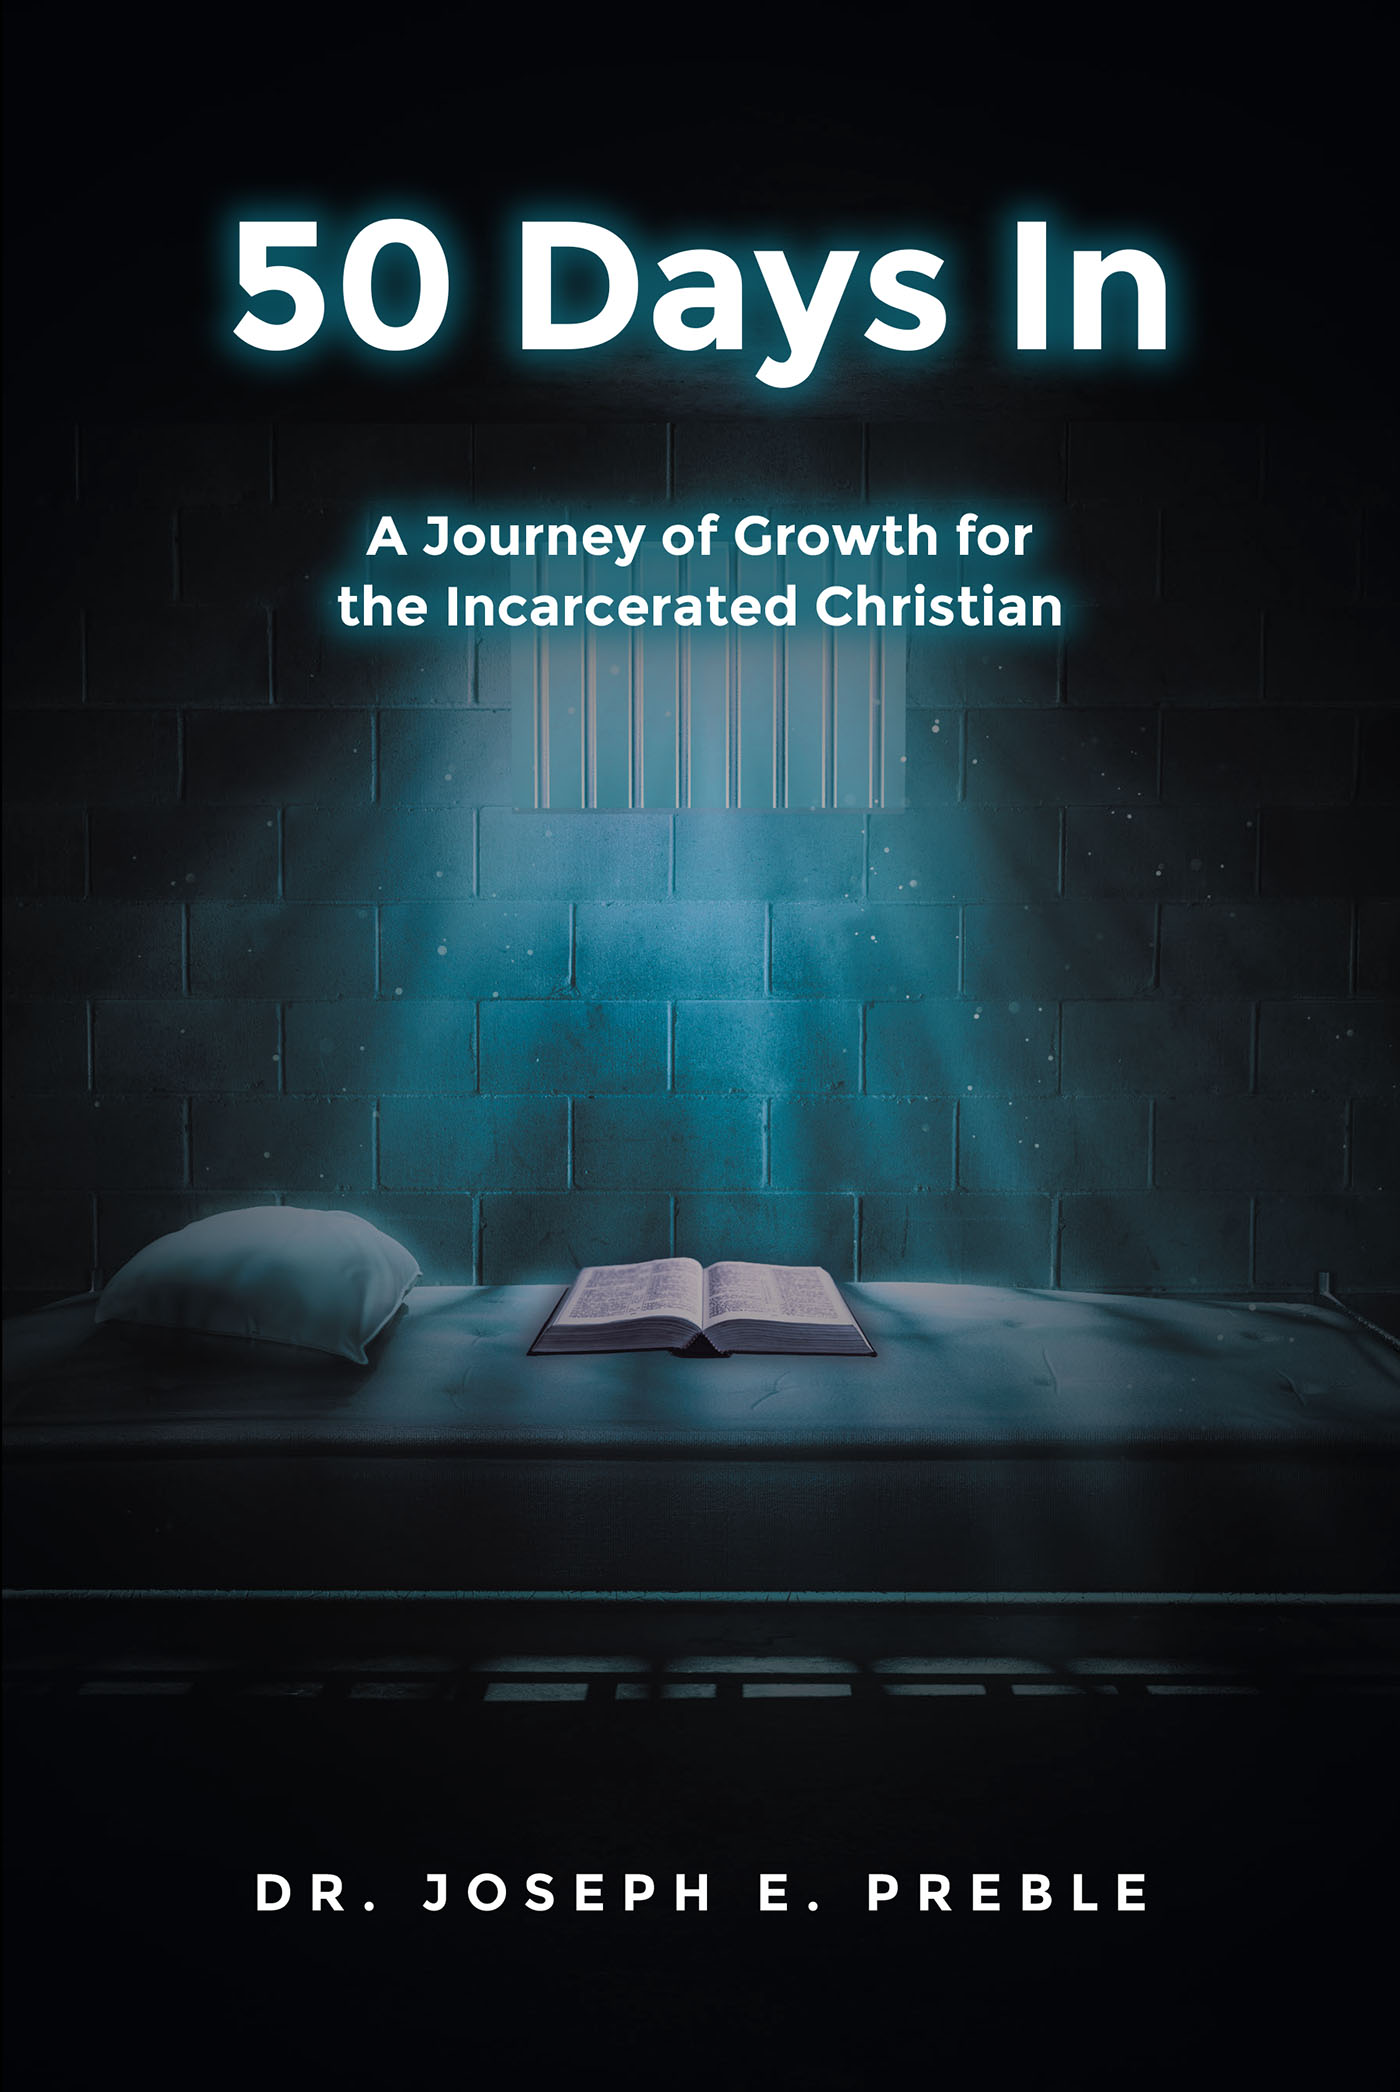 Dr. Joseph E. Preble’s Newly Released “50 Days In: A Journey of Growth for the Incarcerated Christian” is an Engaging Spiritual Experience